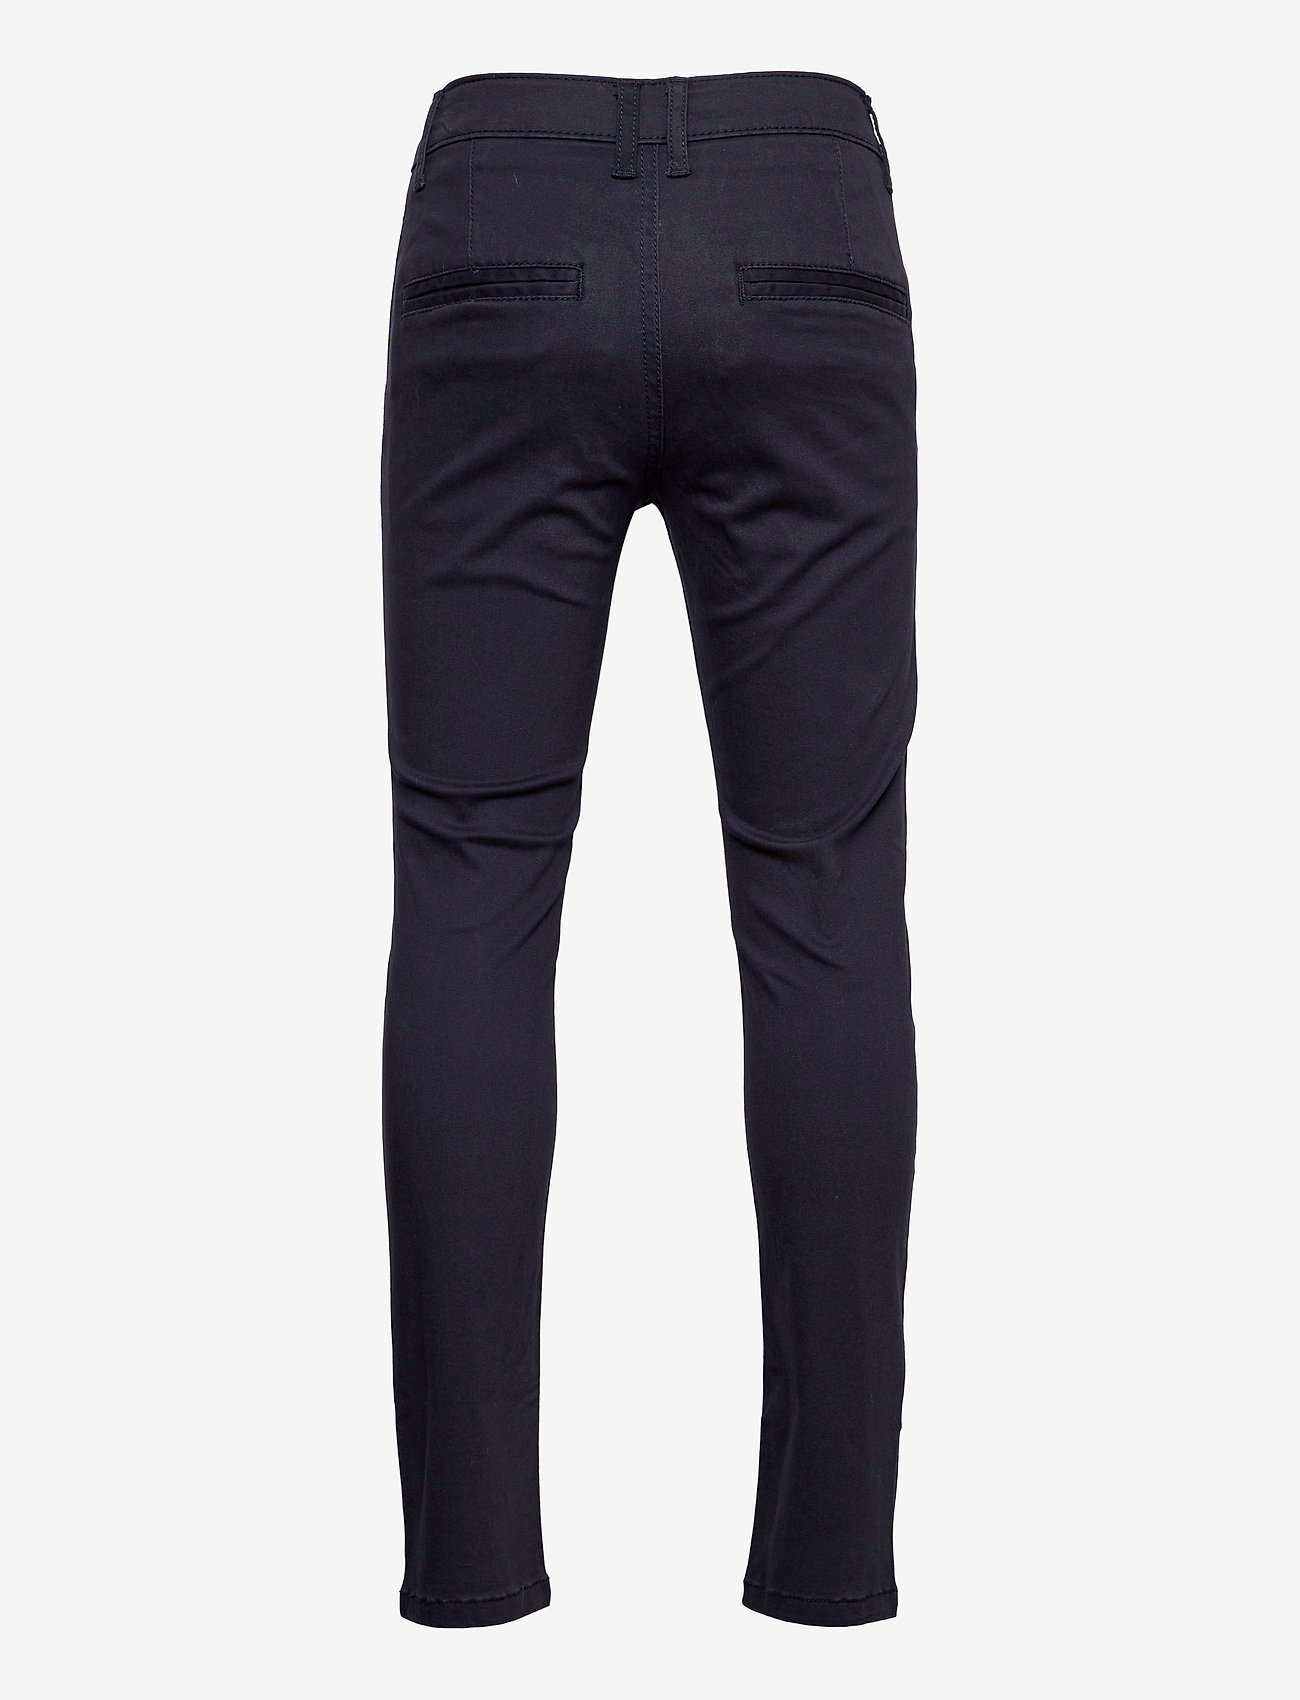 Hust & Claire - Tristan - Trousers - chino's - navy - 1